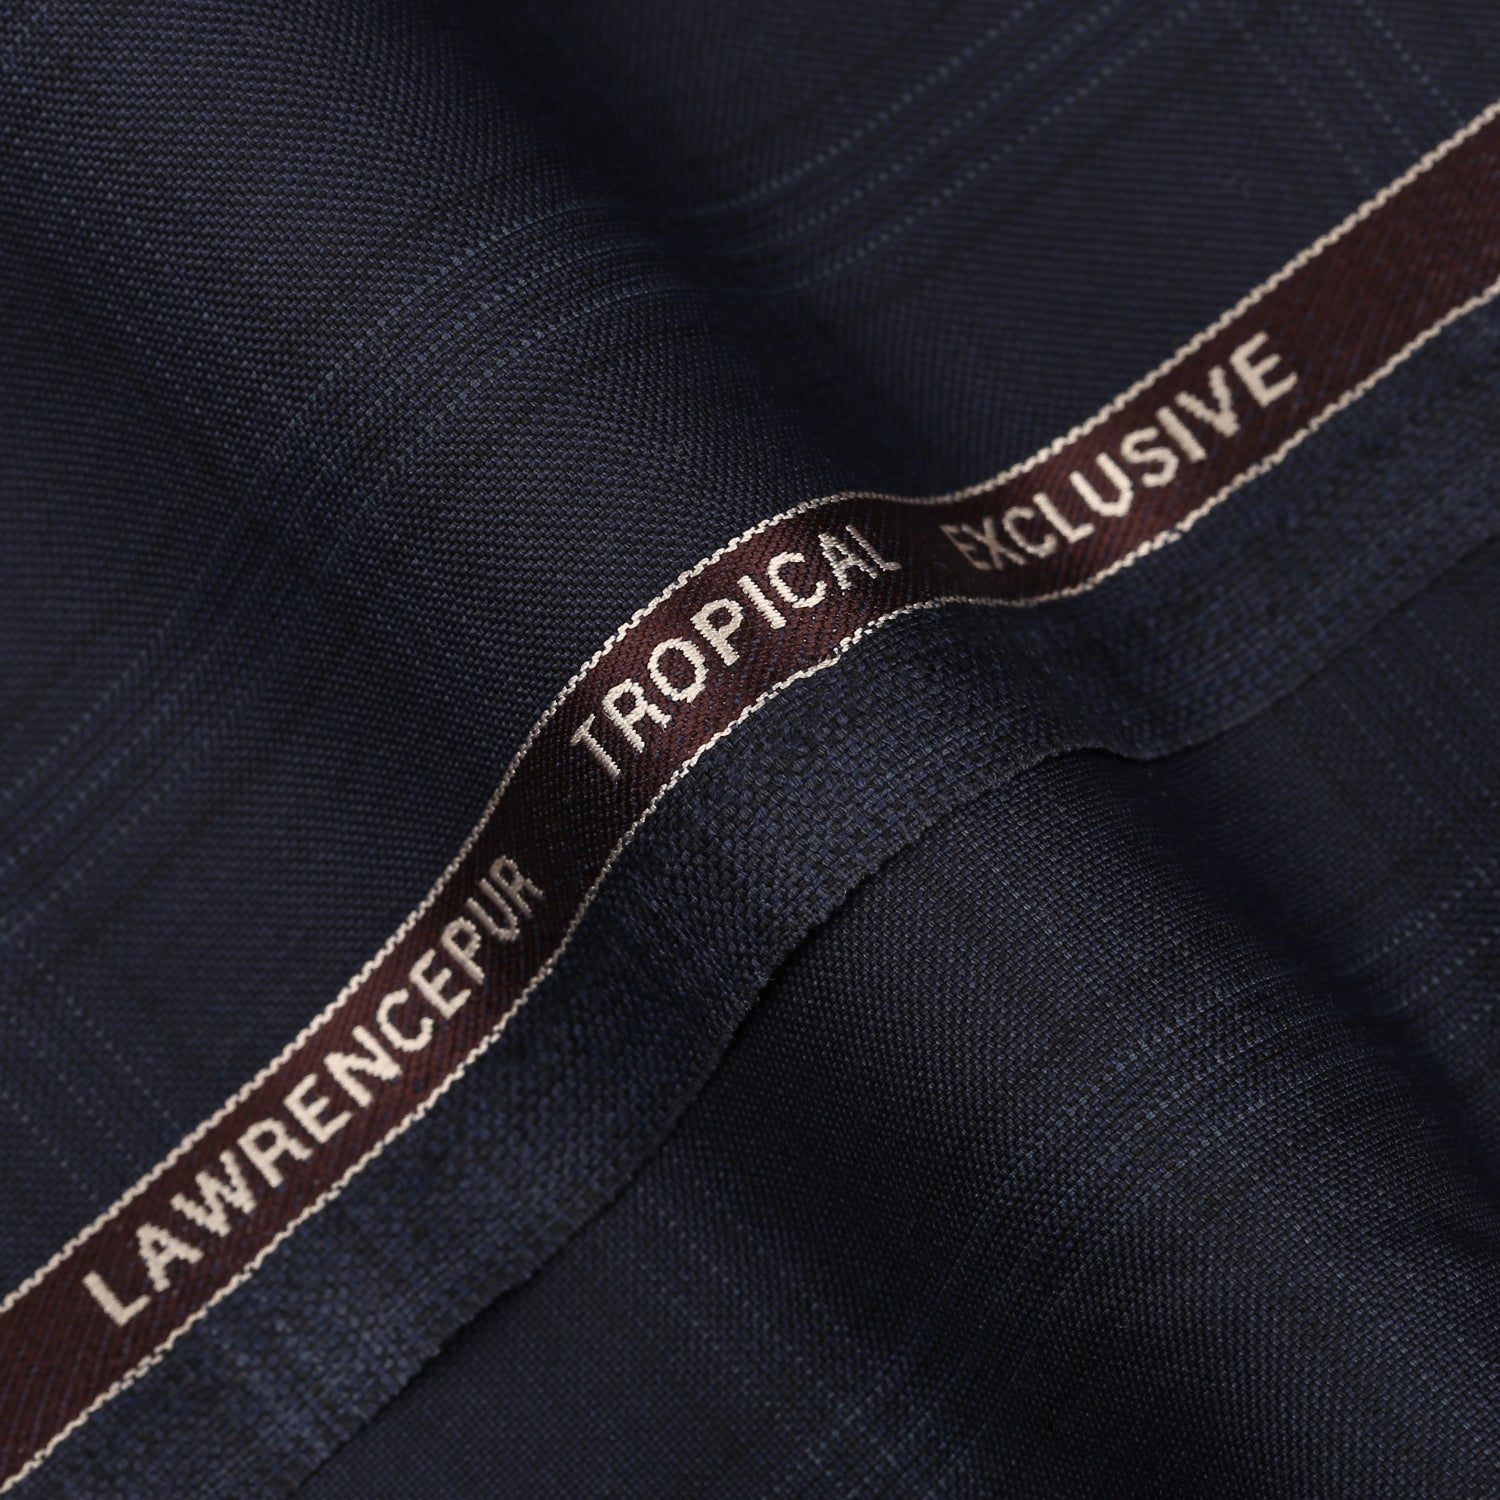 Big Checks-Navy Blue, Wool Blend, Tropical Exclusive Suiting Fabric